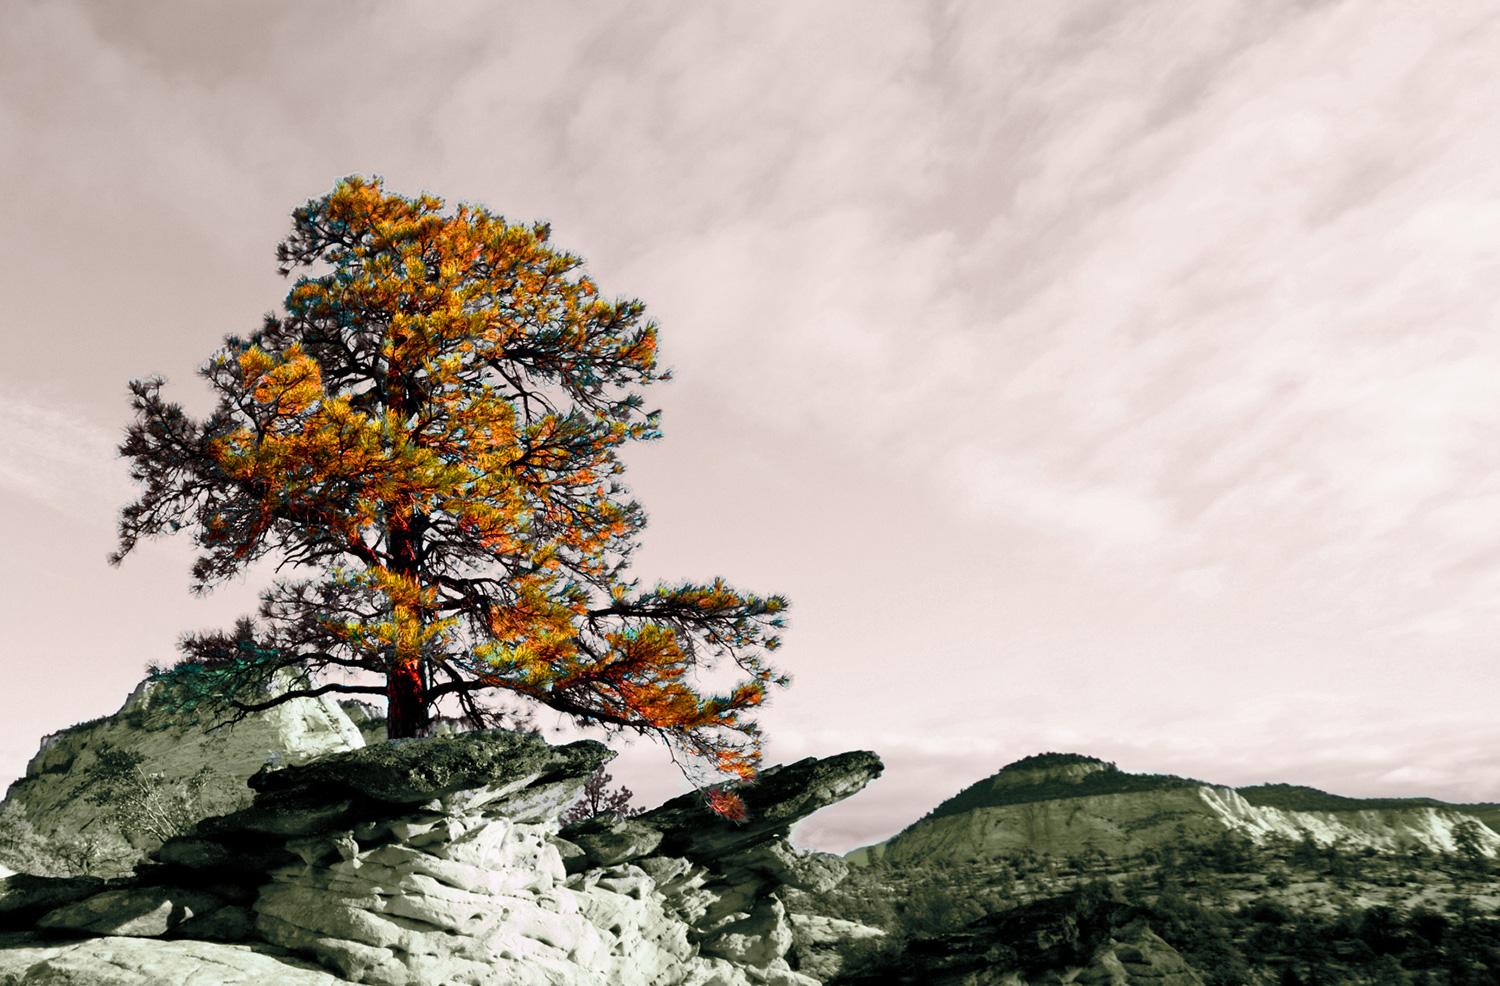 Photograph of a tree flourishing in the harsh climate of Zion’s National Park, Utah.